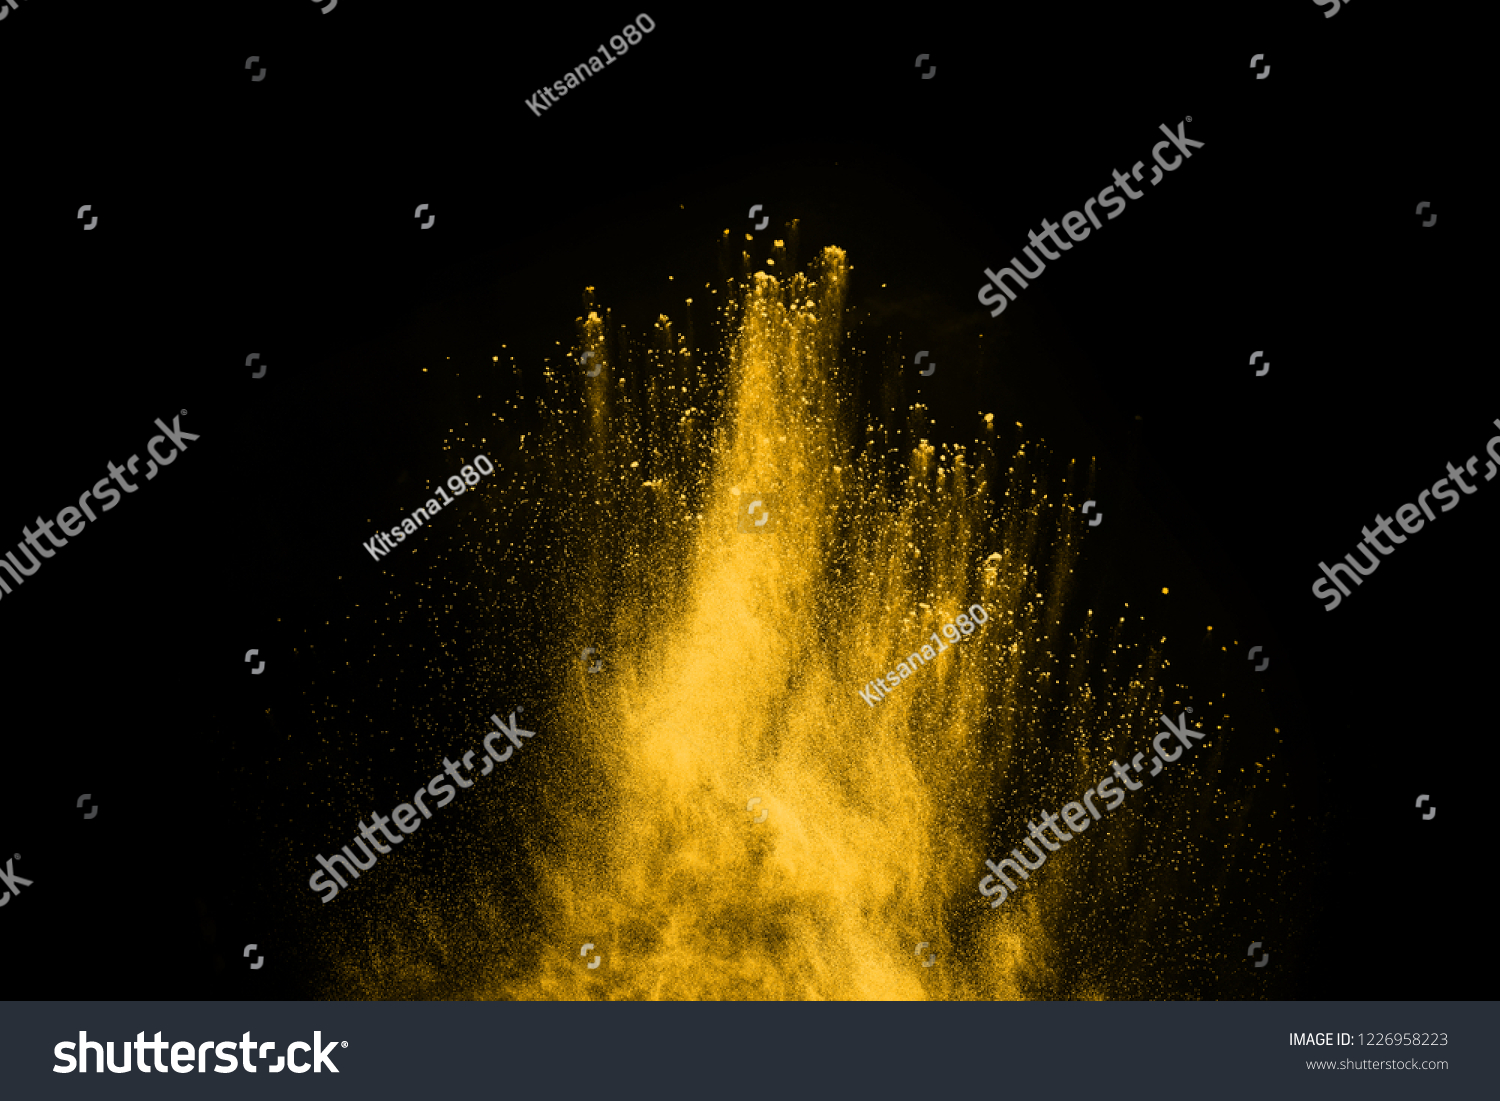 Freeze motion of yellow dust explosion isolated on black background #1226958223